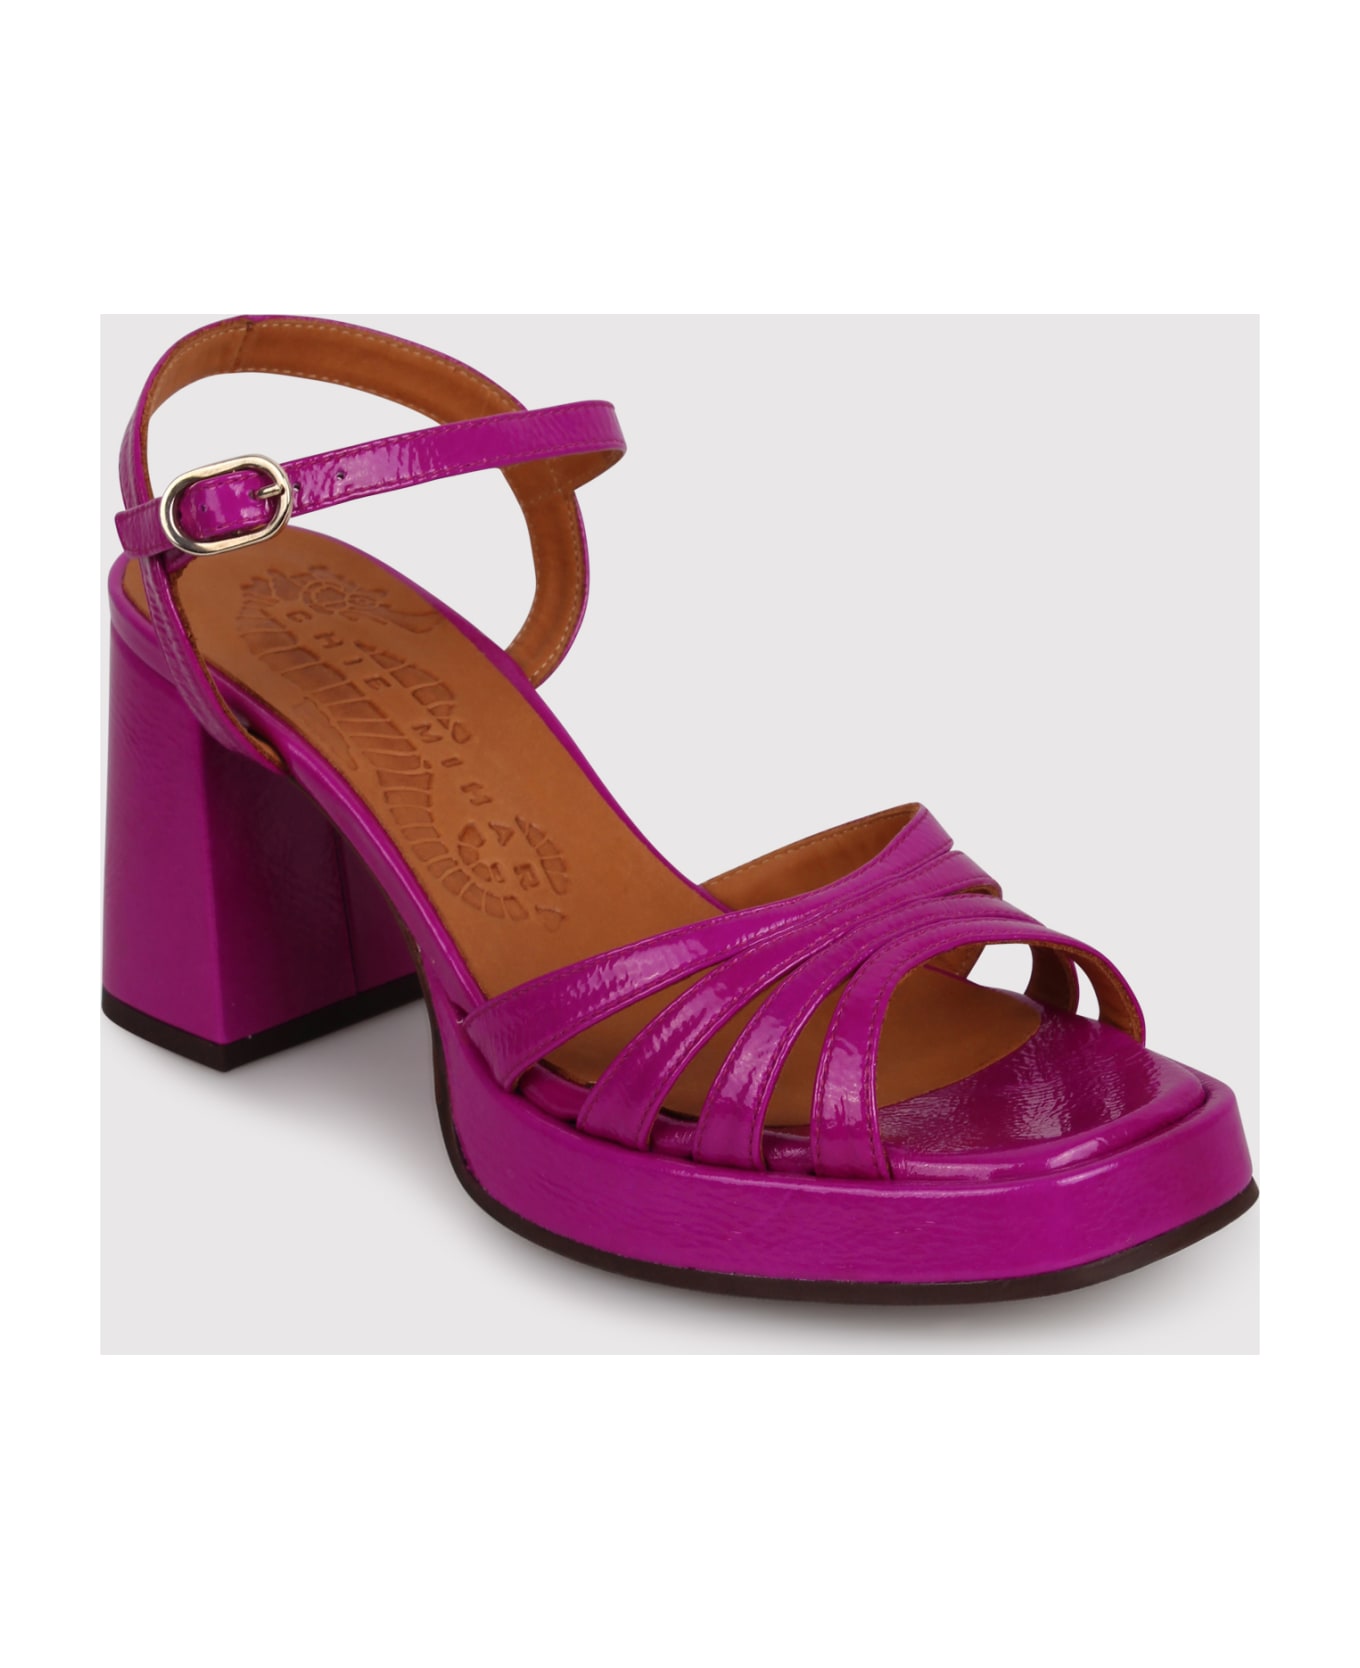 Chie Mihara Naiel 85mm Leather Sandals